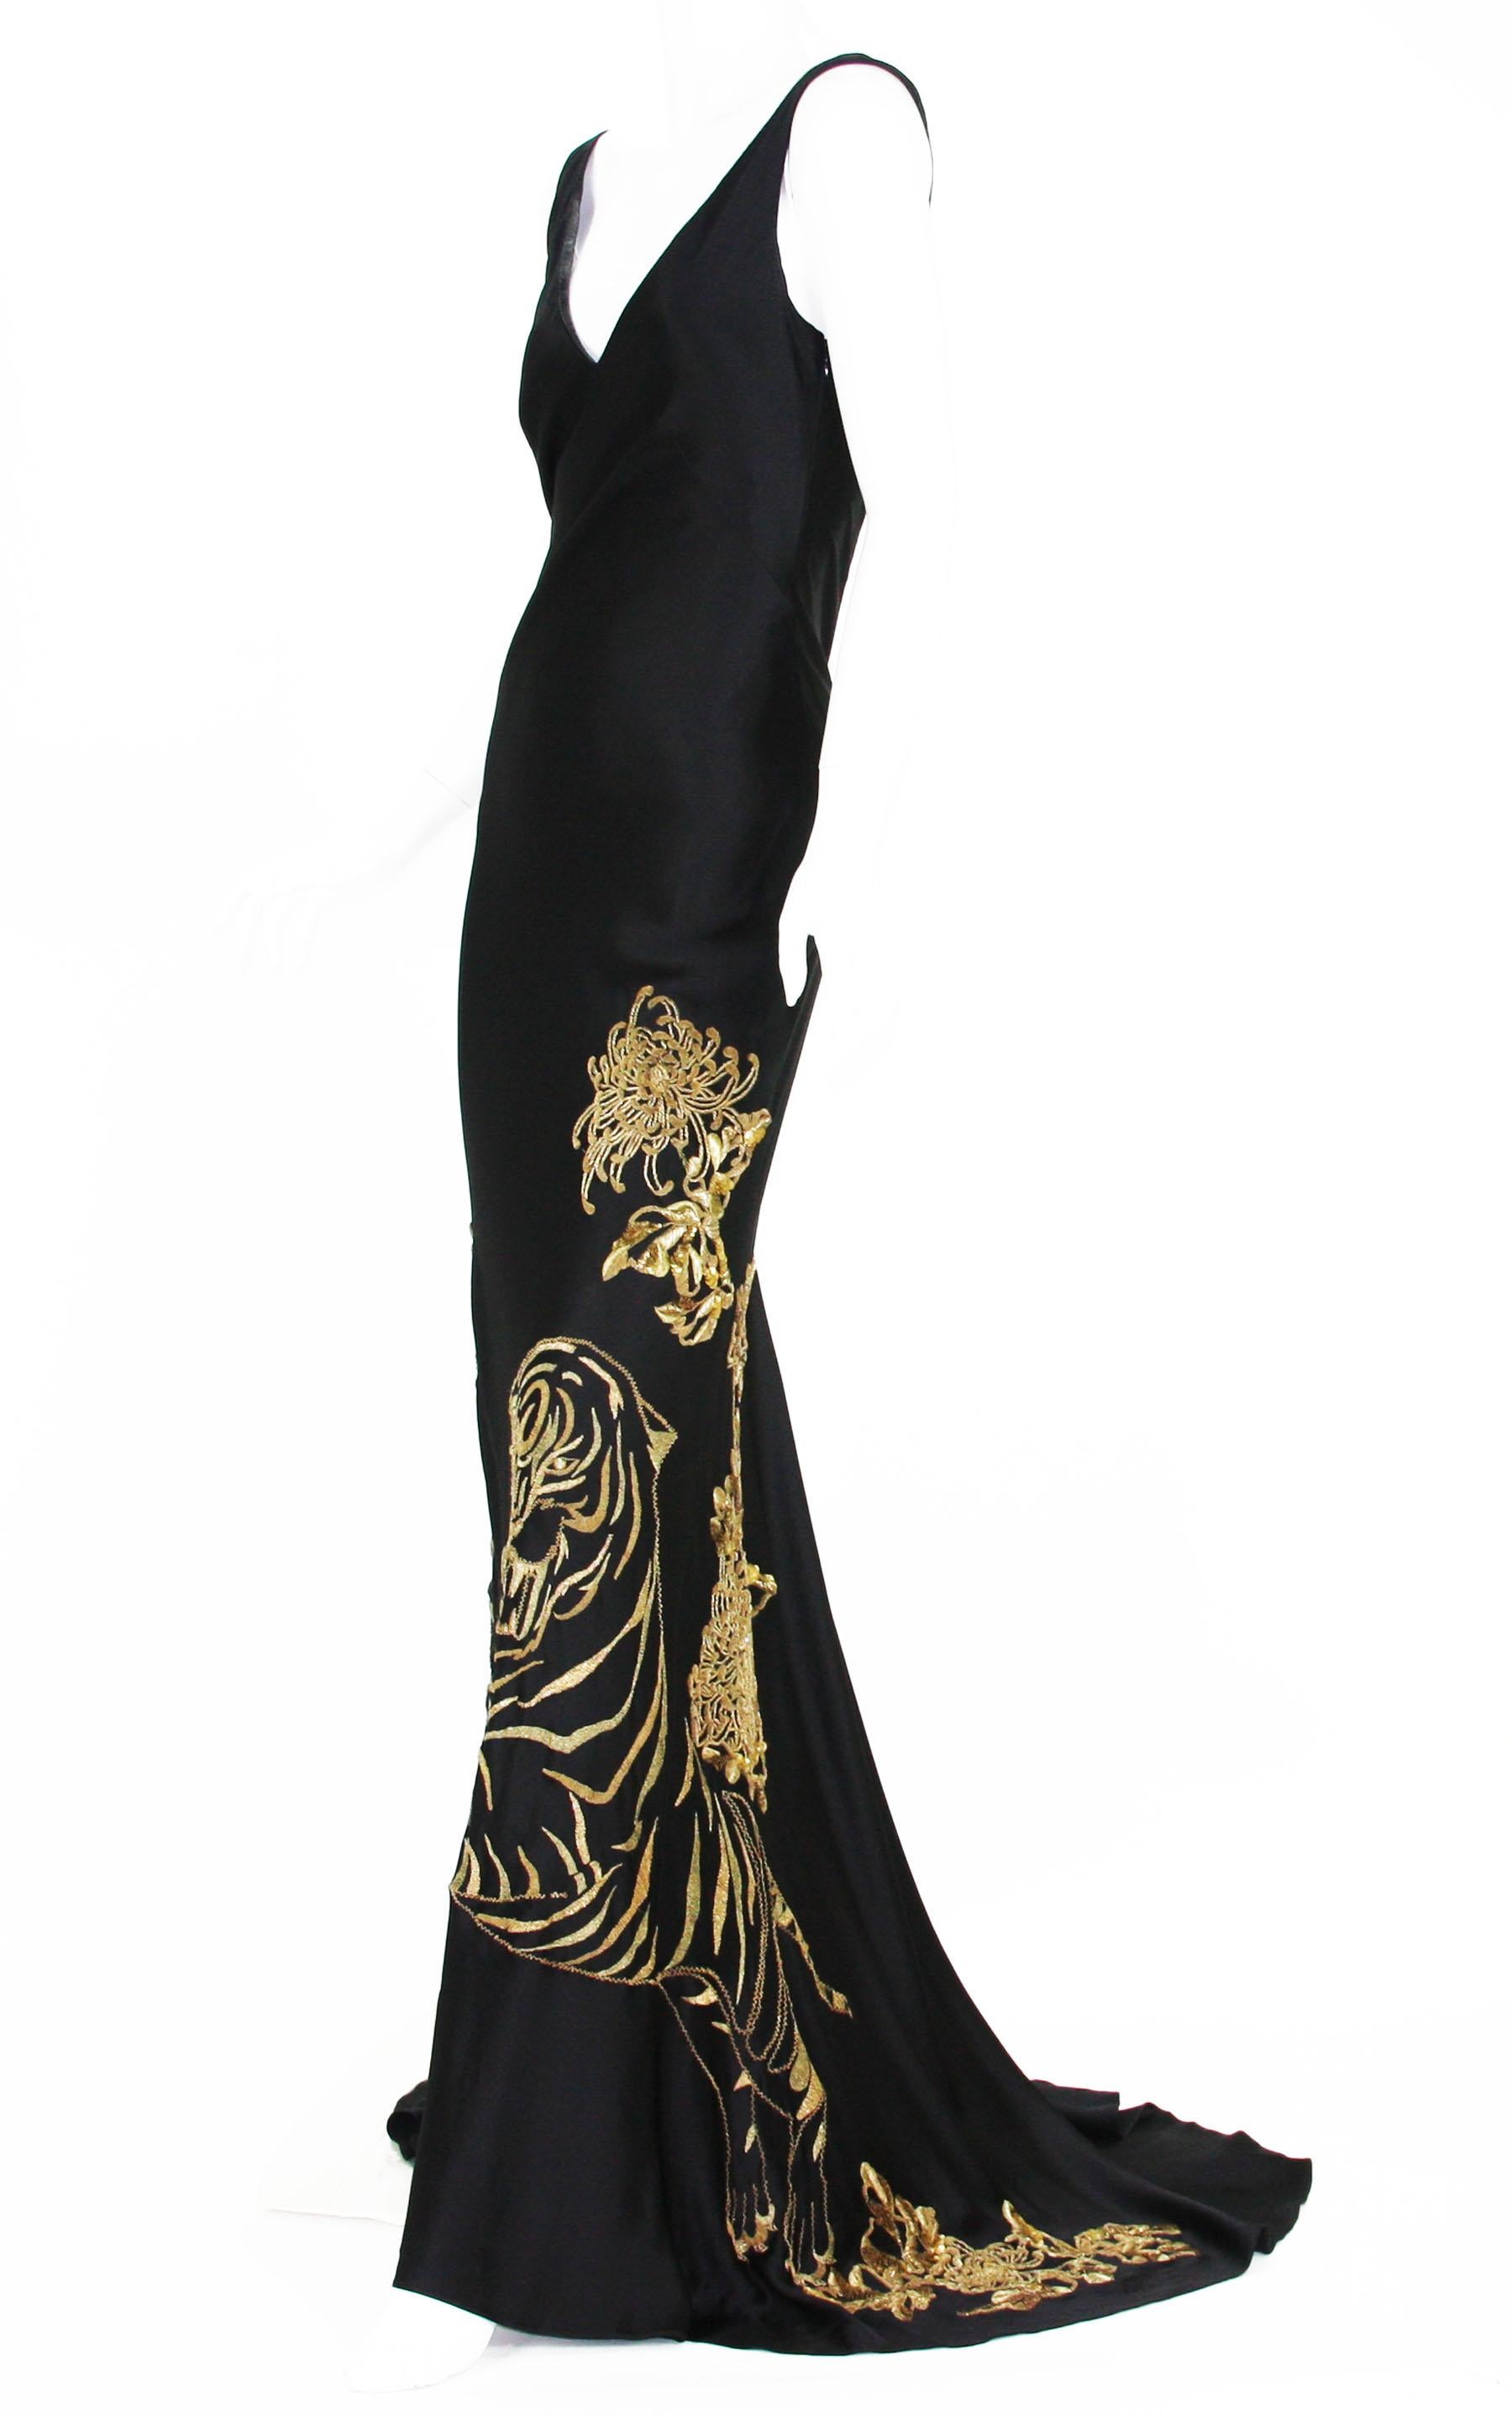 Alexander McQueen Silk Black Dress Gown with Hand Gold Embroidery
2007 Collection
Designer size - 42
100% Silk, Gold Hand Embroidery with Sequins and Rhinestones at the Tiger Eyes, Train Style, Fully Lined in Silk.
Measurements: Bust - 34/36 inches,